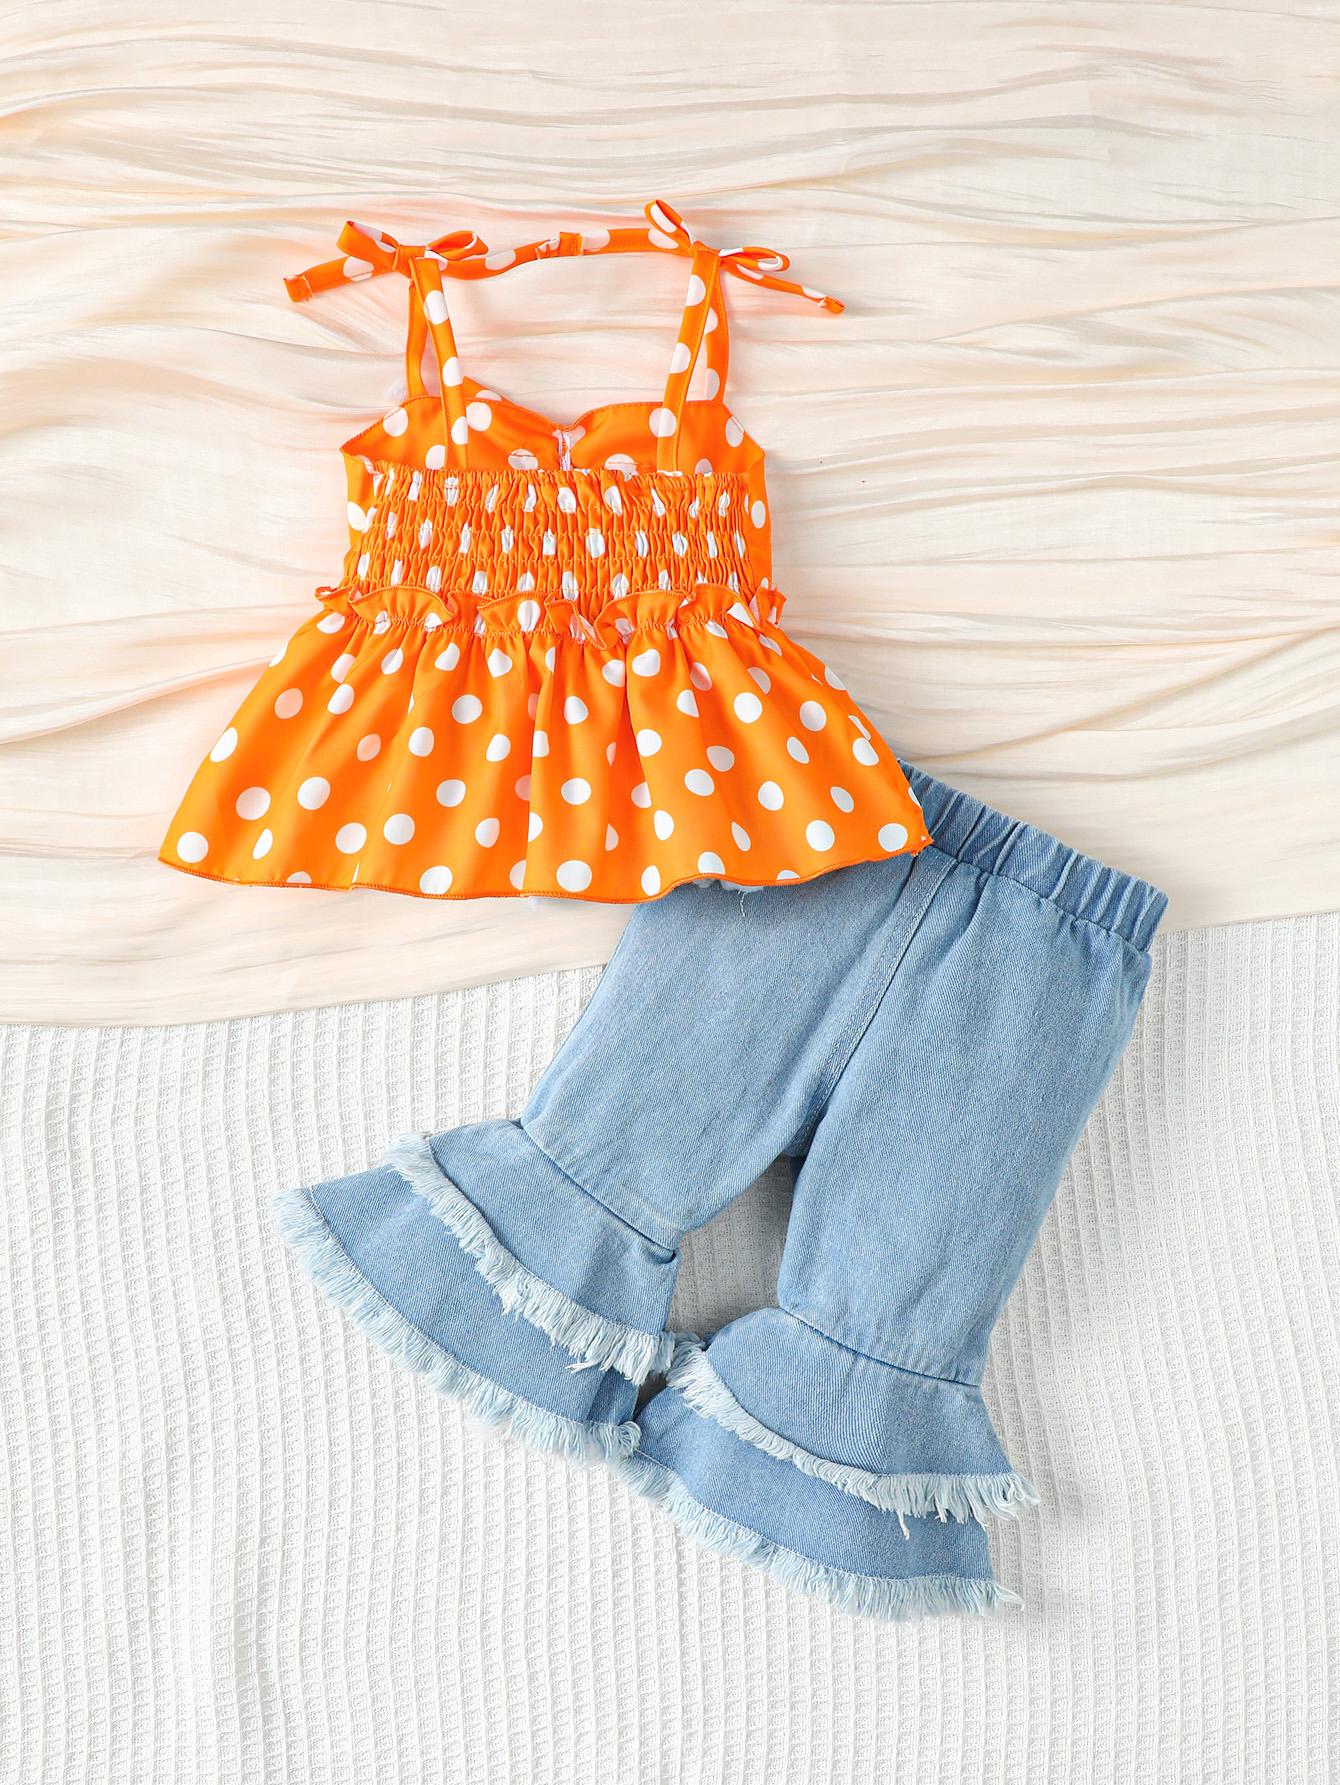 6M-3Y Kids Fashion Ready Stock Girls Clothes Wave Point Print Bow Straps Summer Tops Jeans Bell-bottomed Pants 2Pcs Nice Apparel Outfits Yellow Catpapa 112210153